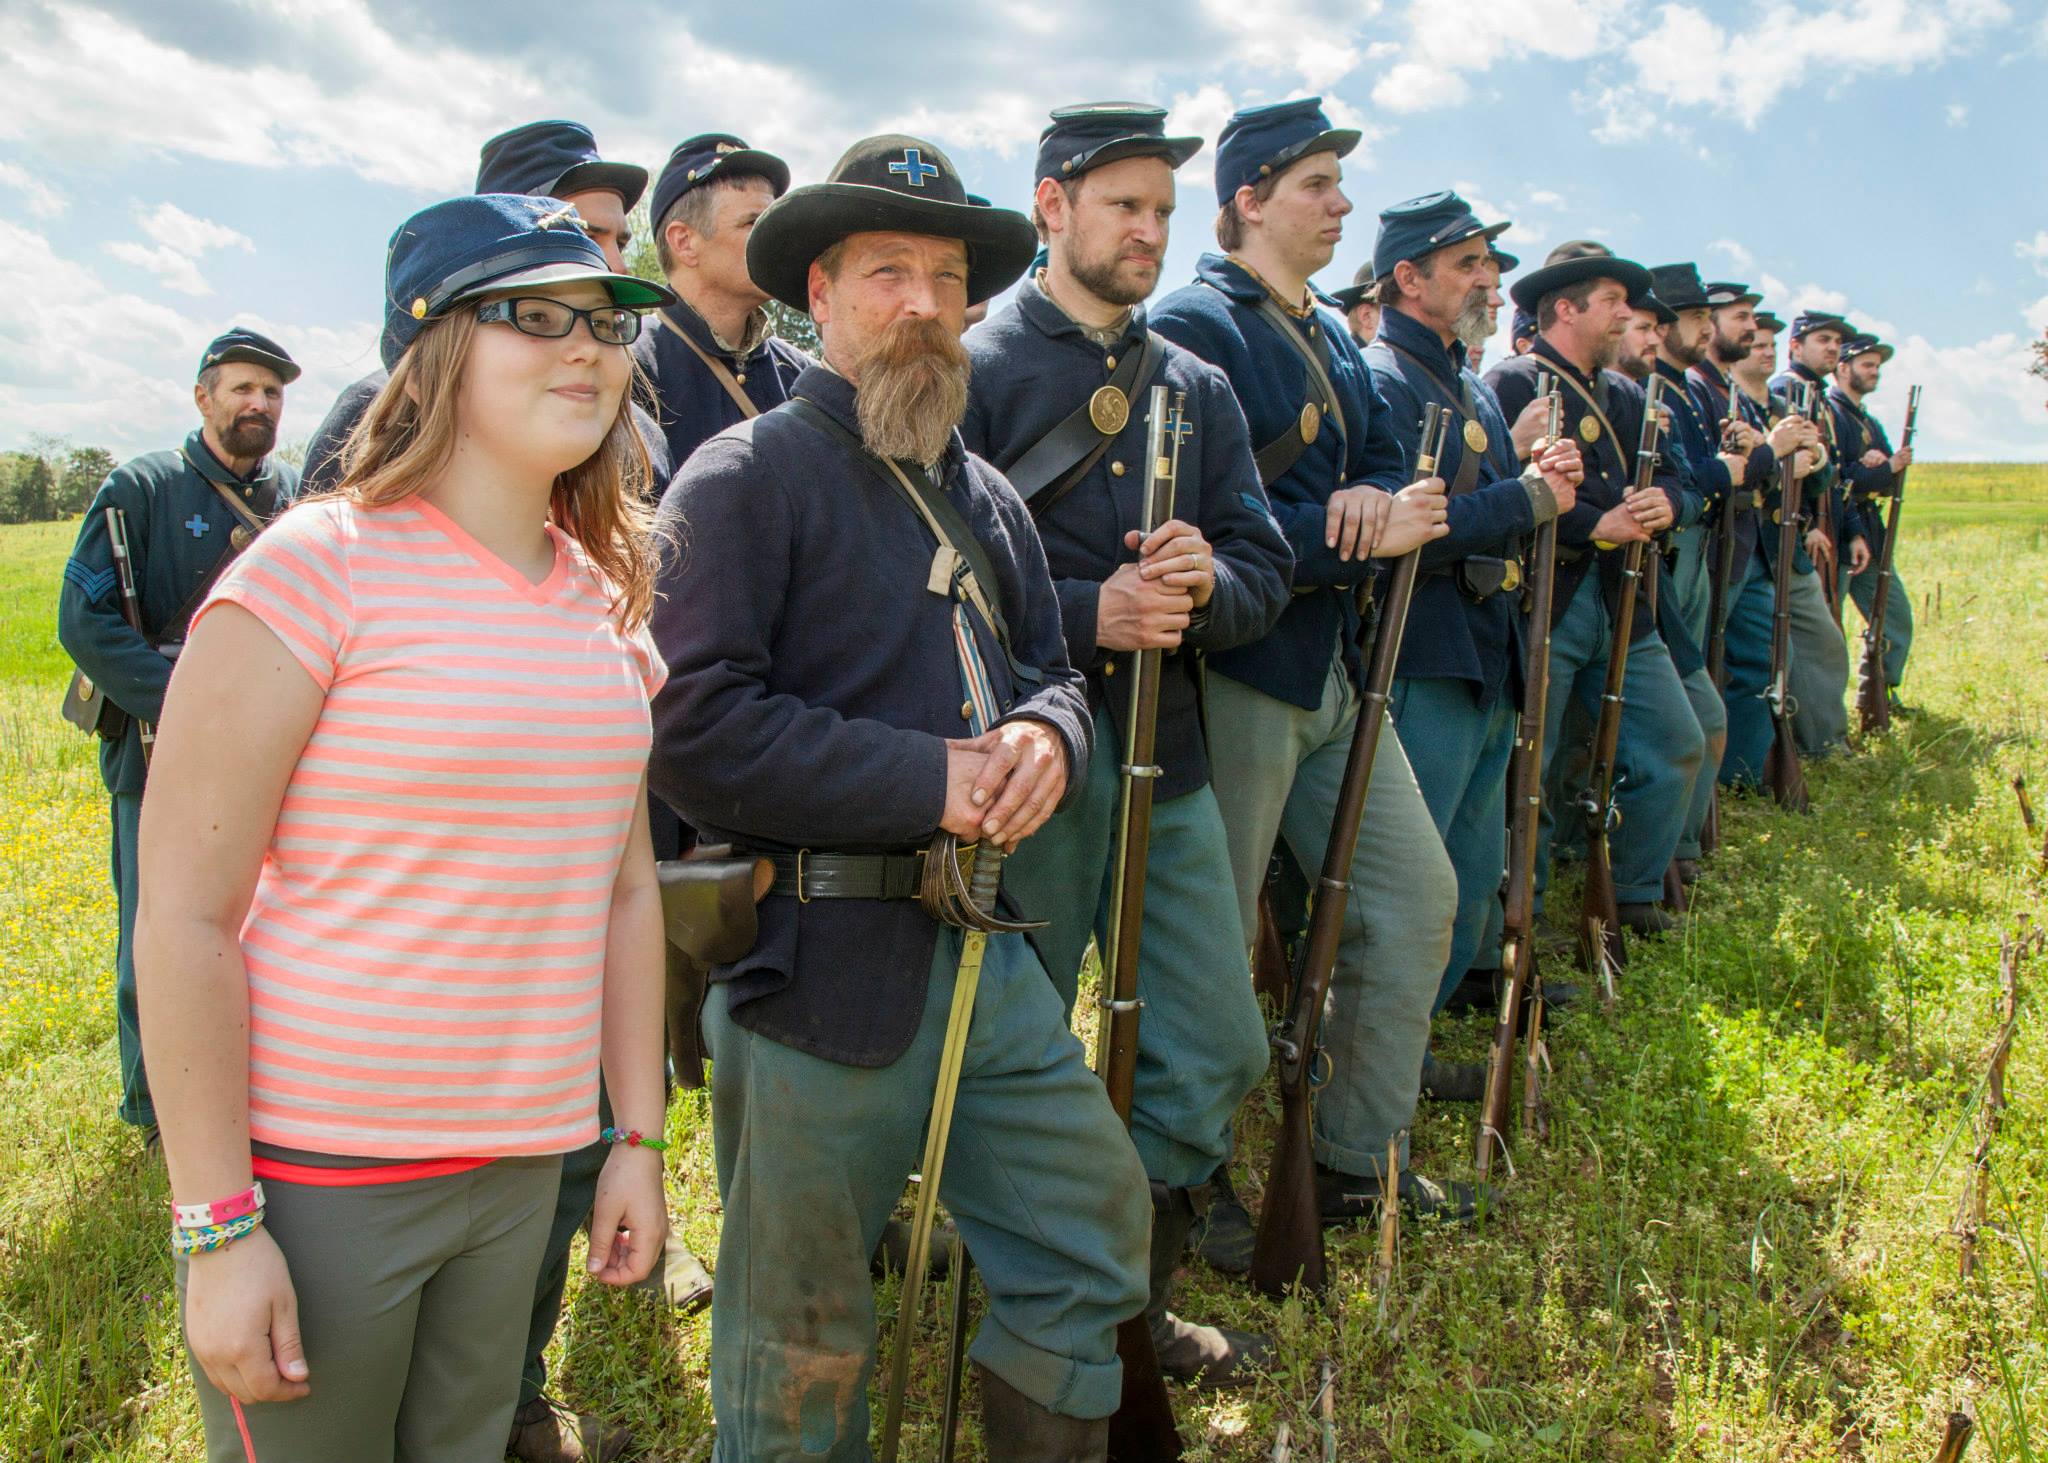 A girl wearing a soldier's hat stands with a row of reenactors